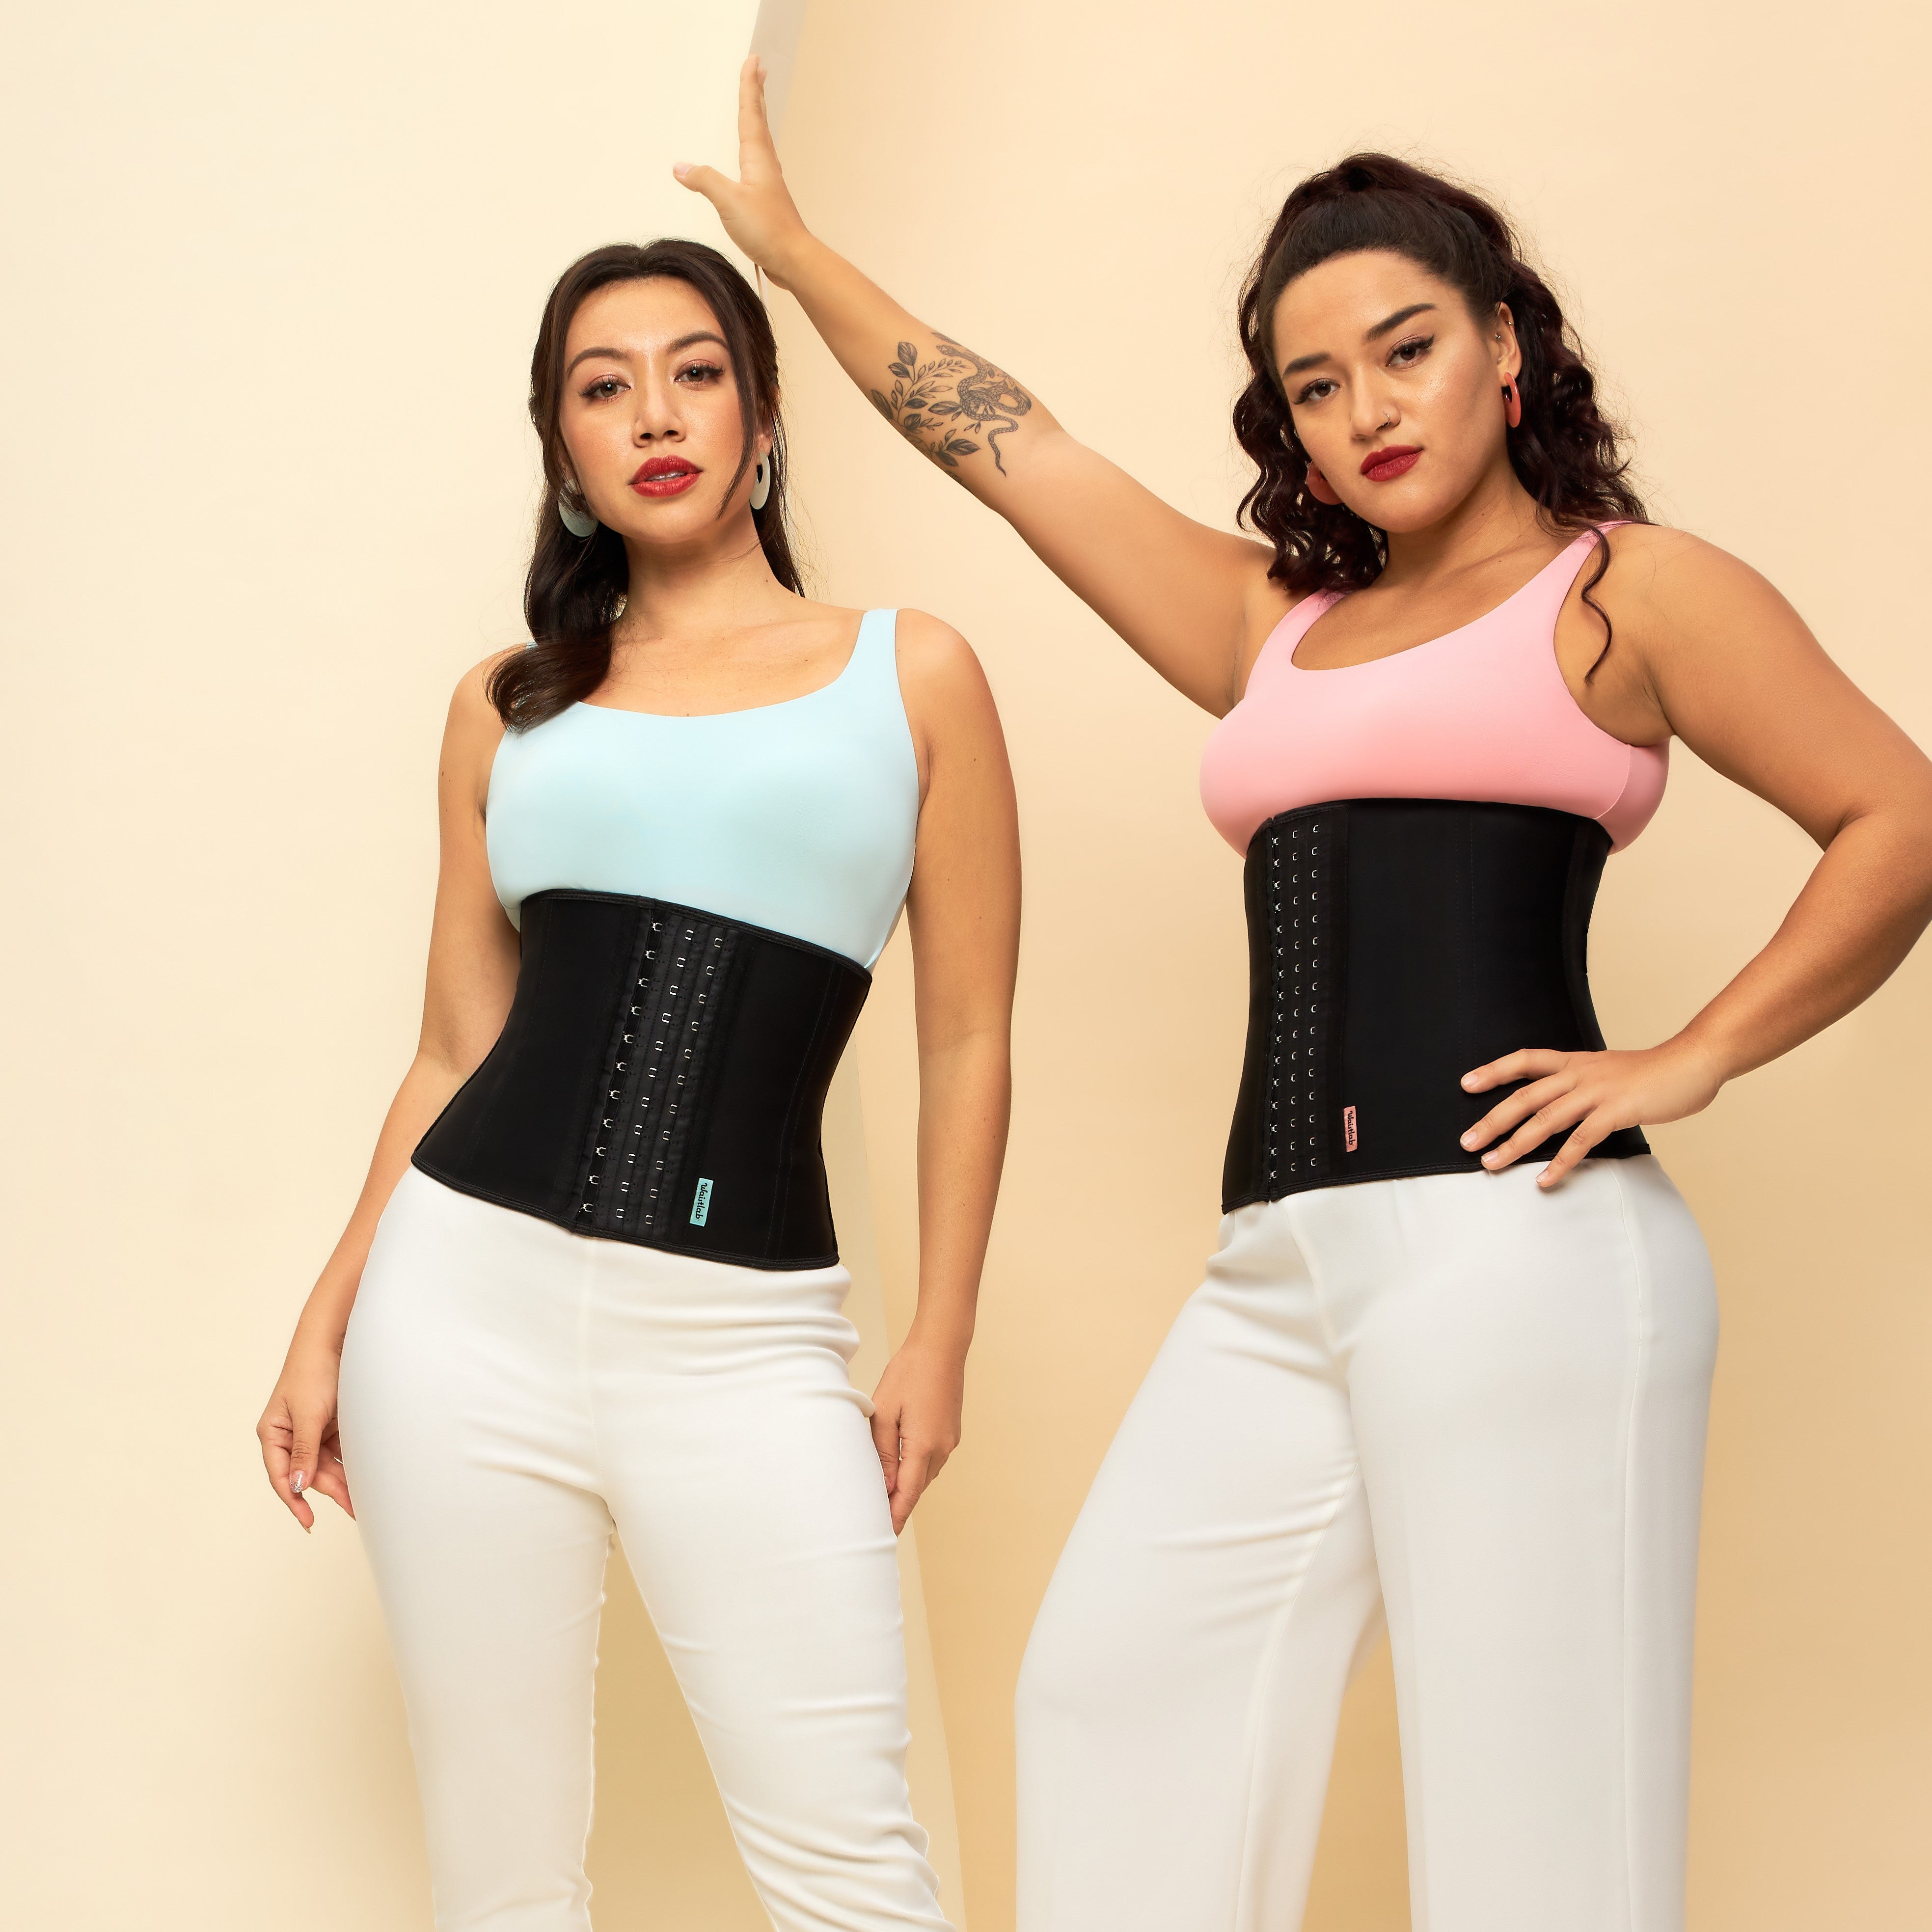 Waist Training For Beginners - What You Should Know (2022 Update